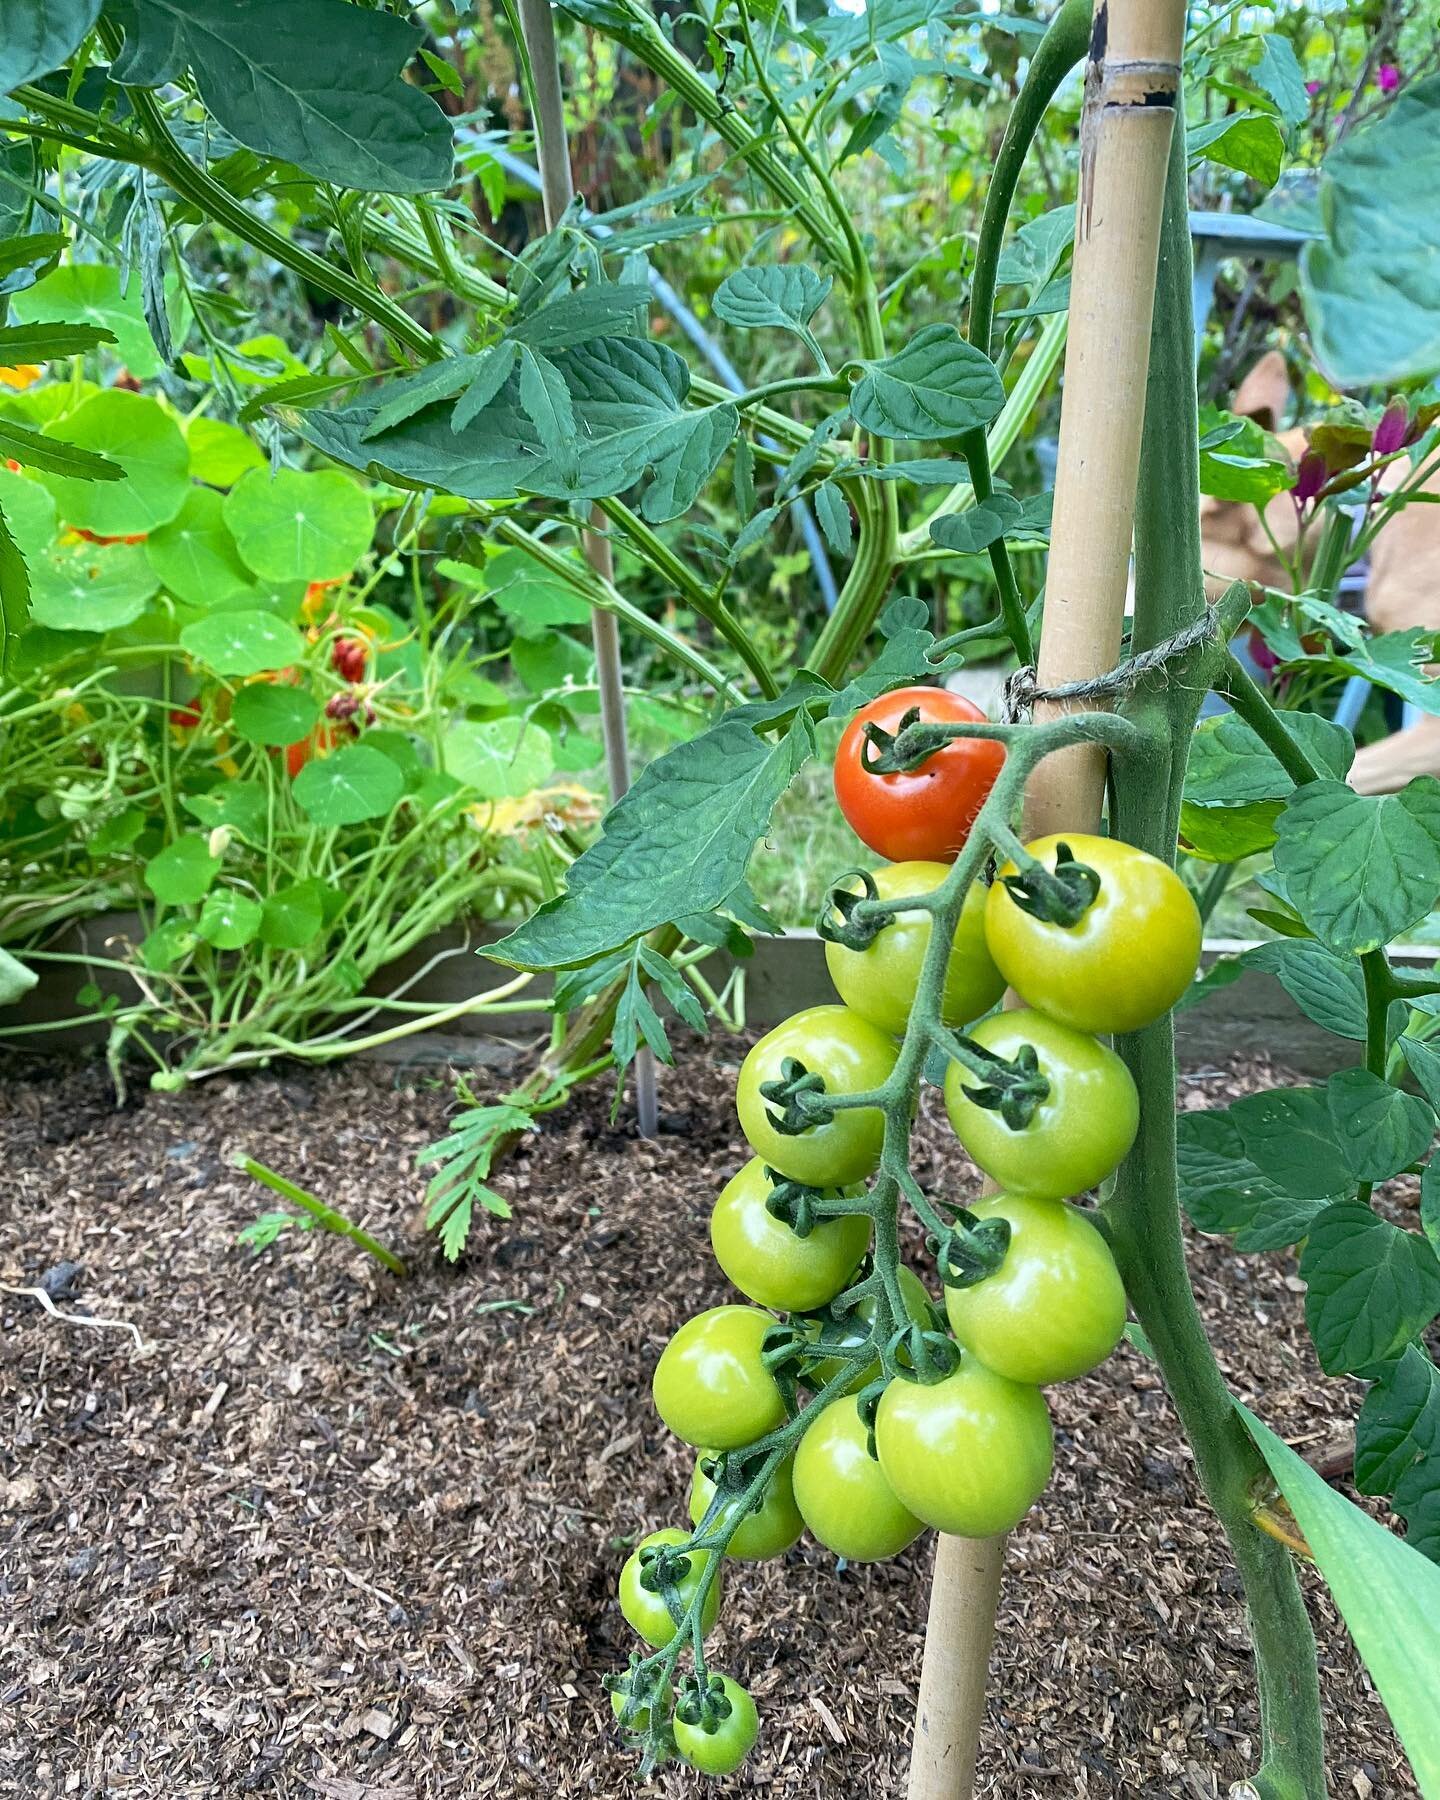 Tomatoes 🍅 need a couple of things to ripen - long sunny days and warm weather (but not too warm!)

Looks like we have all of that this week 🥰 so hopefully we get some more of these traffic lights🚦!

#mulching #growingtomatoes #allotment #growyour